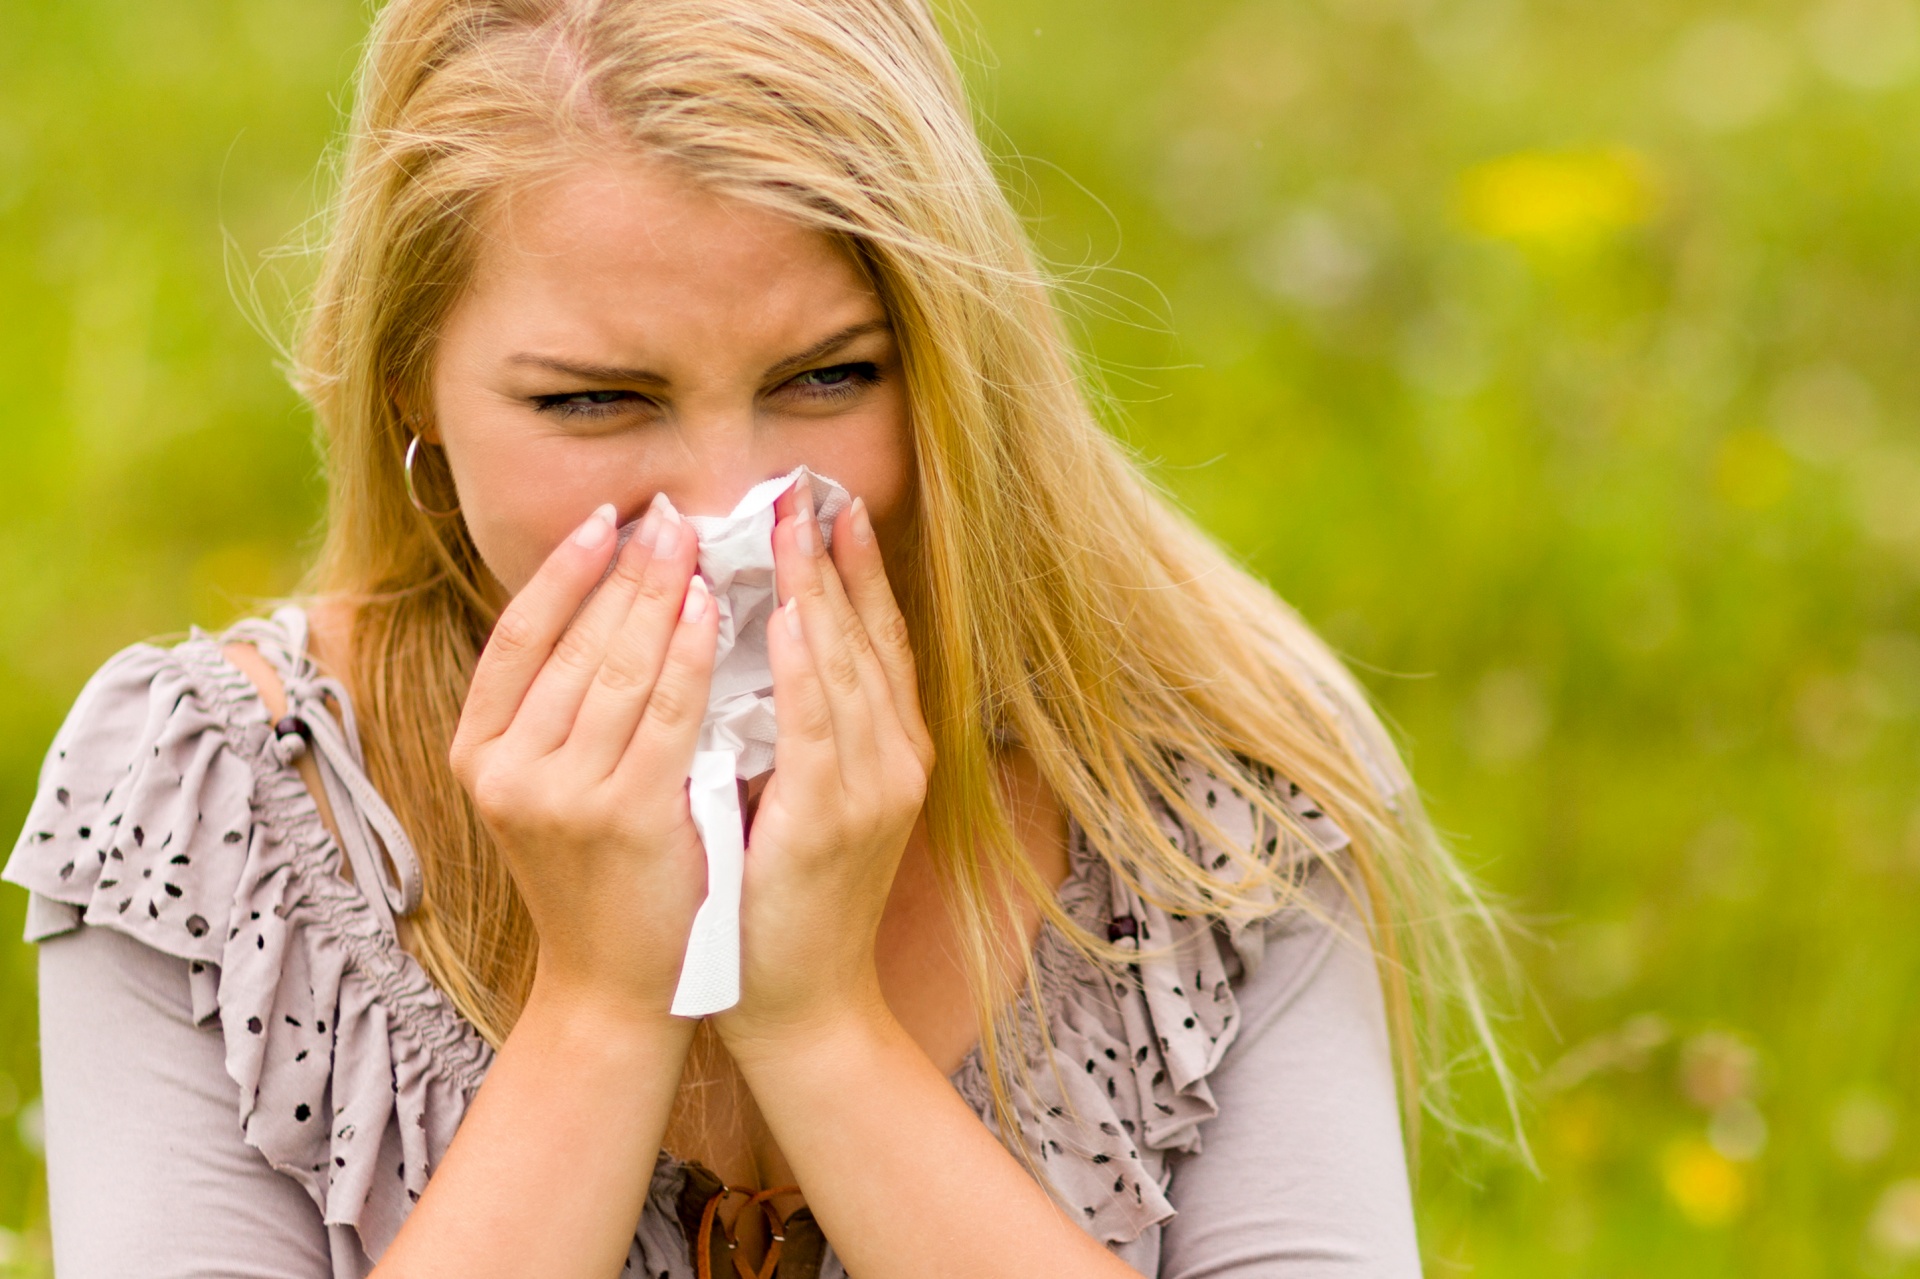 Young woman with a hay fever holding a tissue